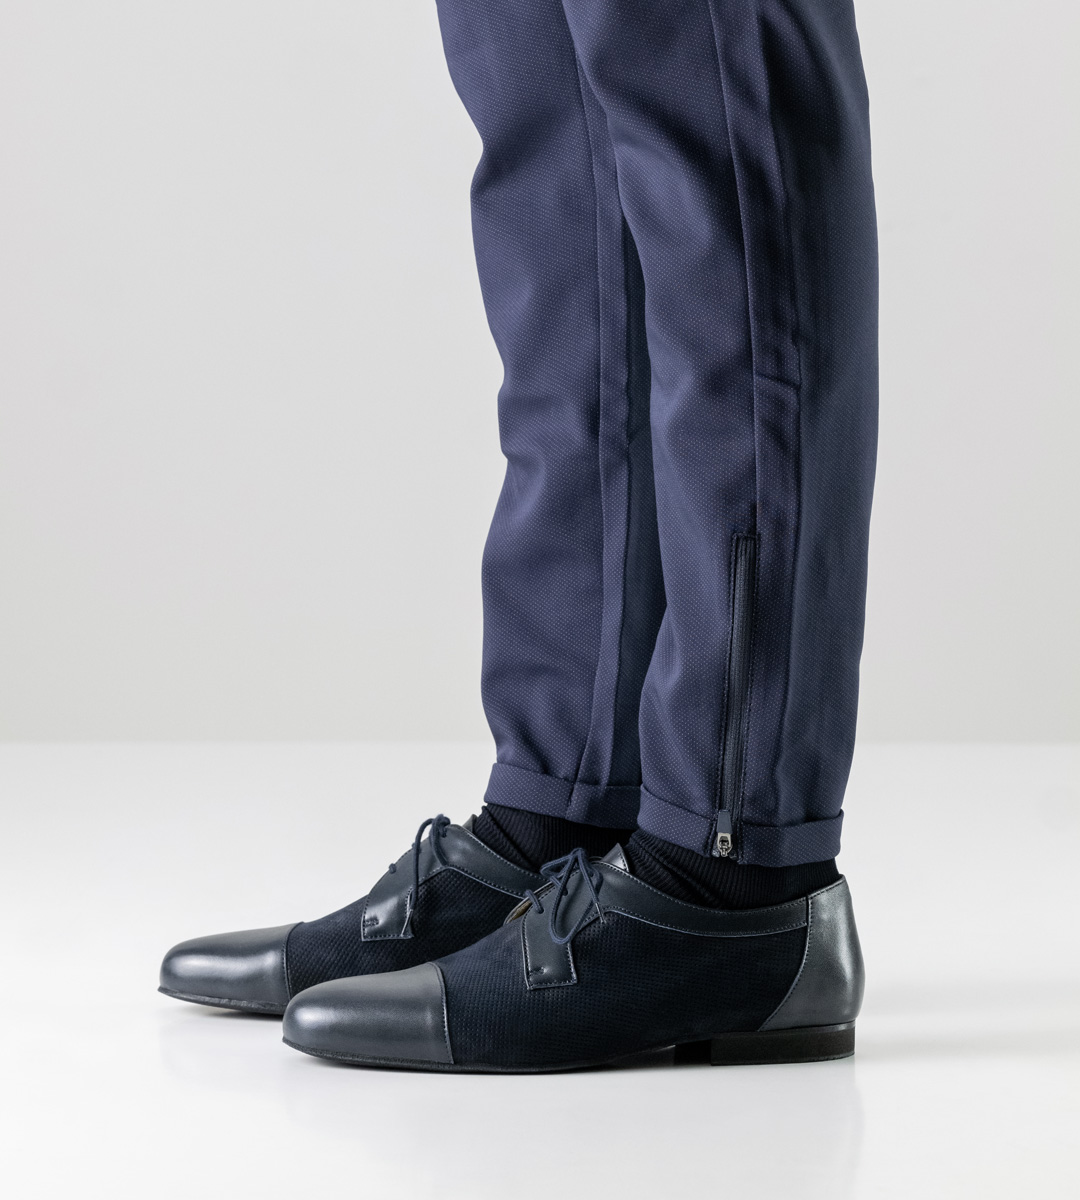 blue jeans in combination with Werner Kern men's dance shoe in suede and leather